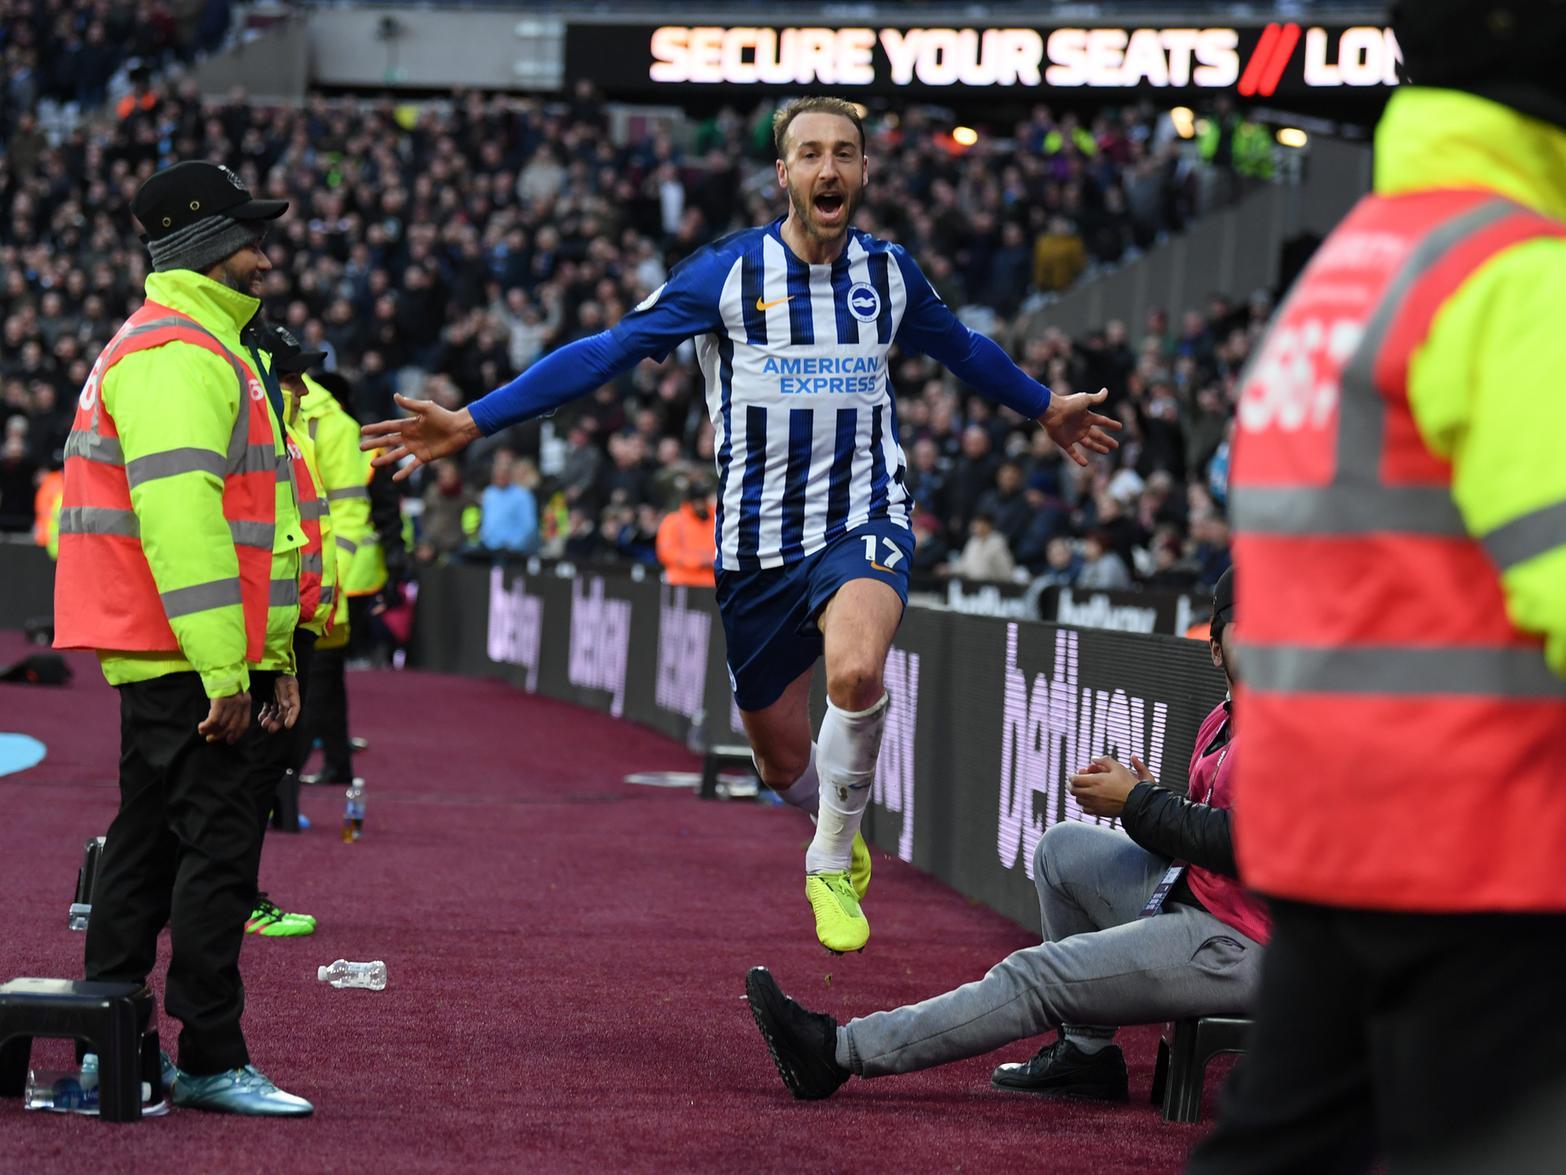 Nottingham Forest's hopes of signing Glenn Murray from Brighton look to be over, with the veteran striker securing a new deal with the club after failing to see a January move materialise. (Sky Sports)